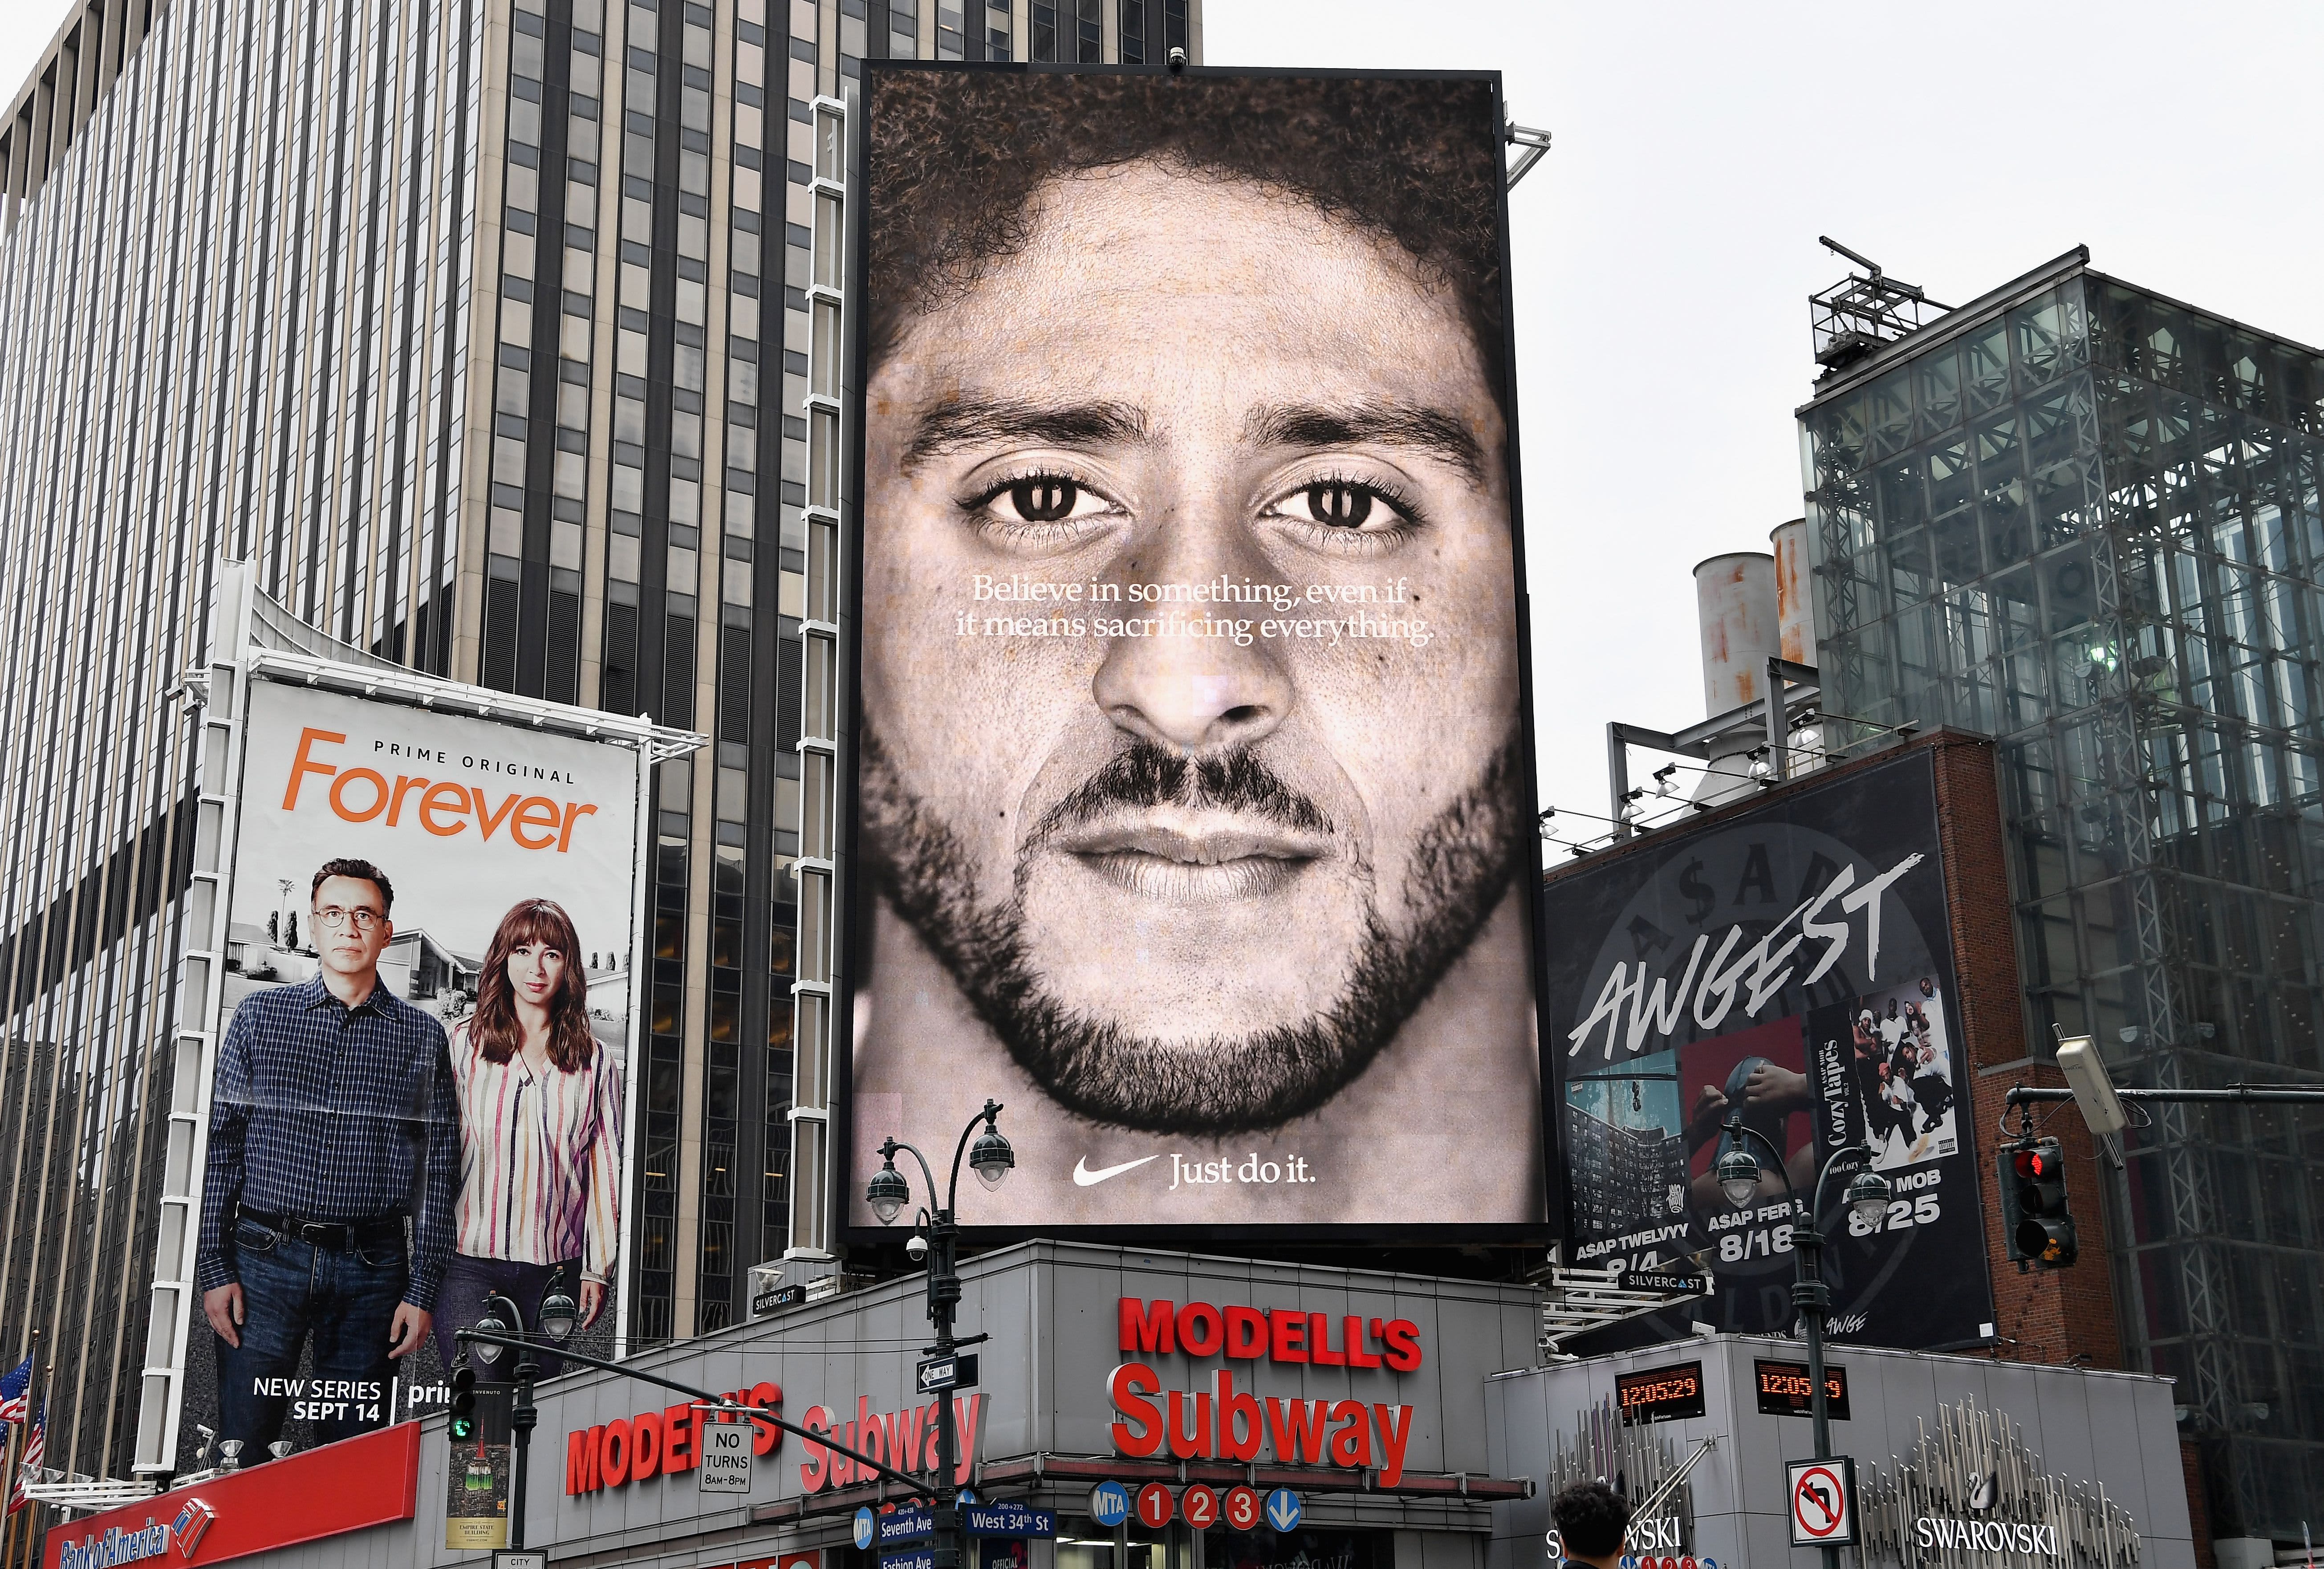 Nike nearly dropped Colin Kaepernick putting him in advert